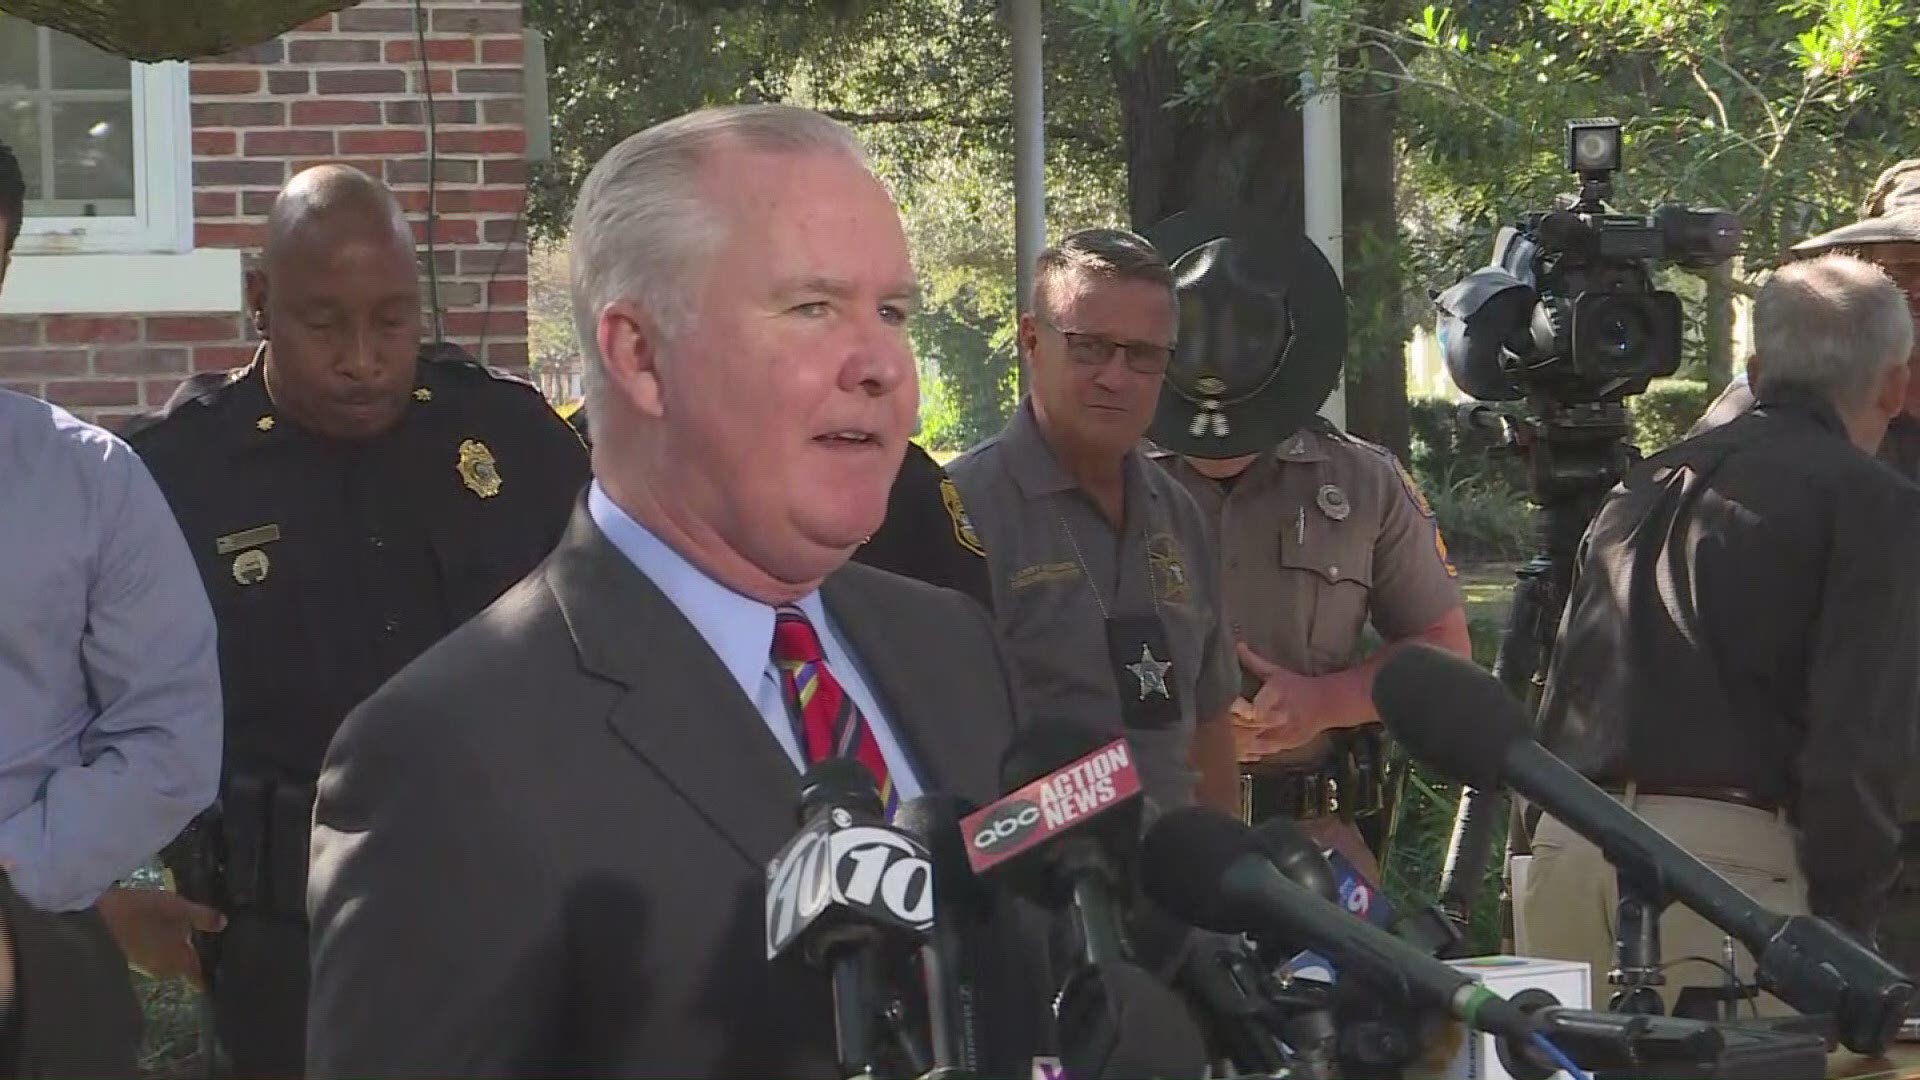 A powerful statement by Tampa Mayor Bob Buckhorn speaking of Howell Emanuel Donaldson III, the suspect in the Seminole Heights murders: "If he is found to be guilty, he should die."